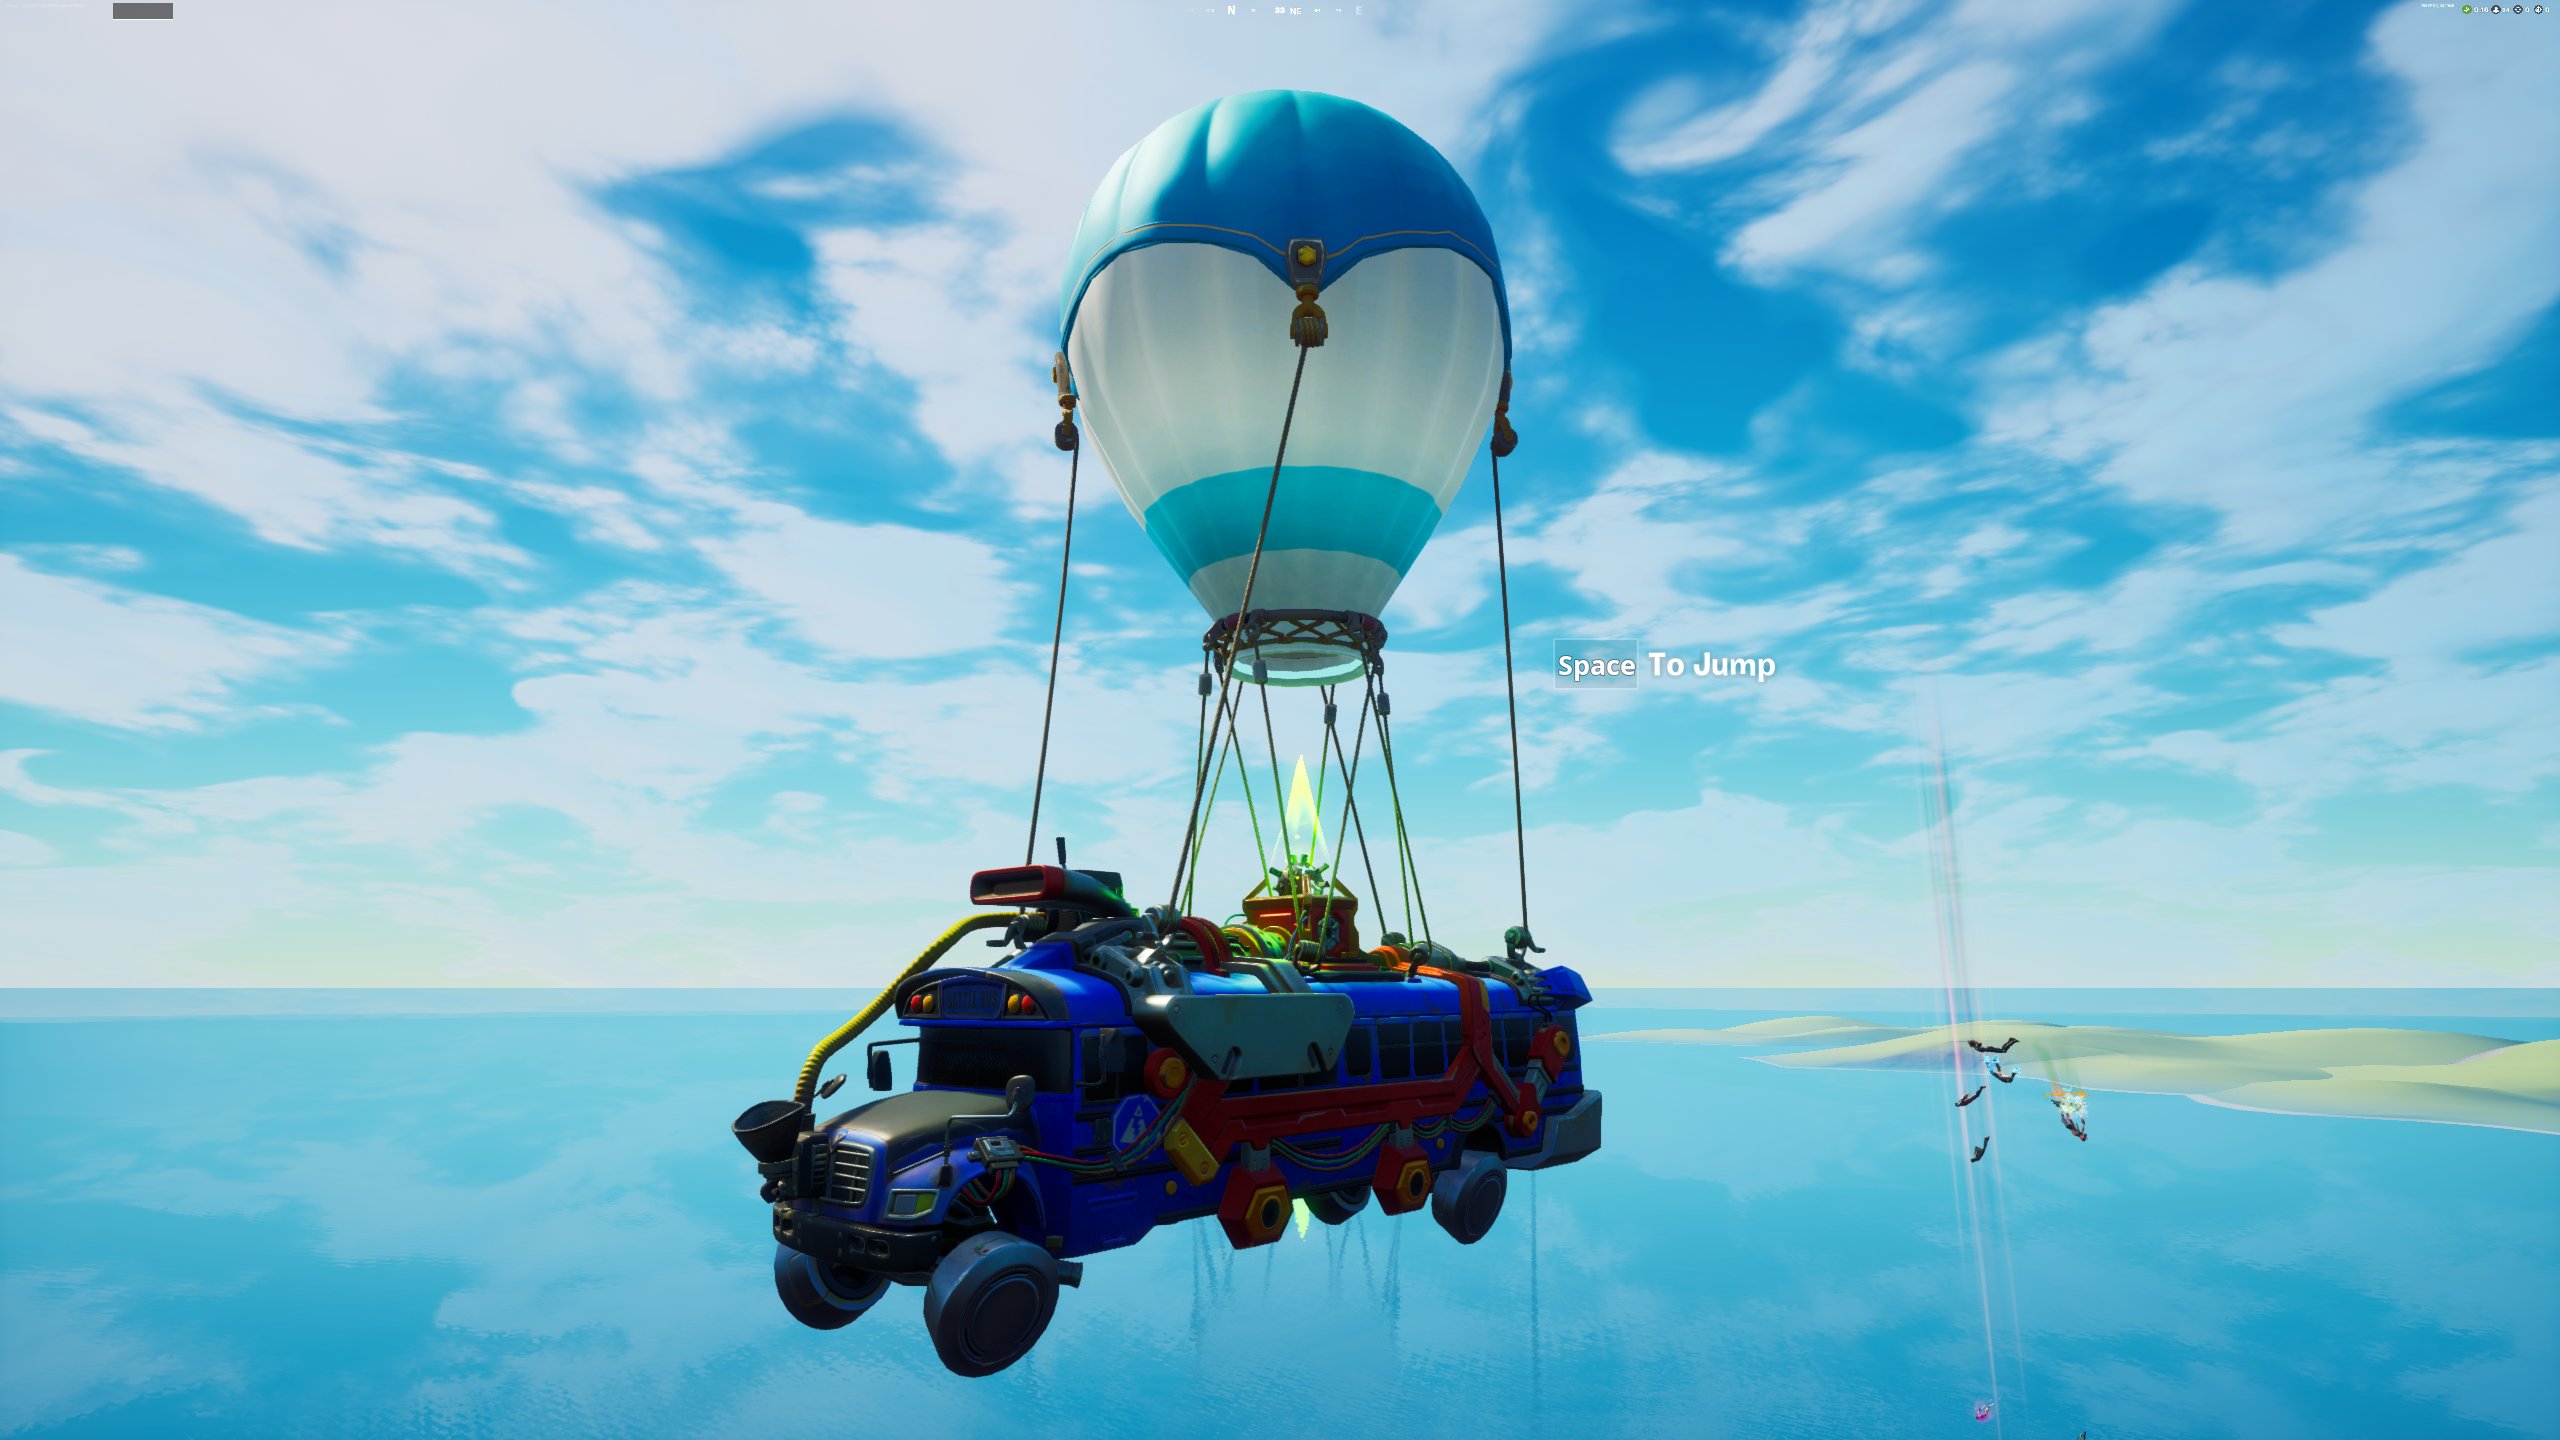 Shiina on the upgraded battle bus is now in